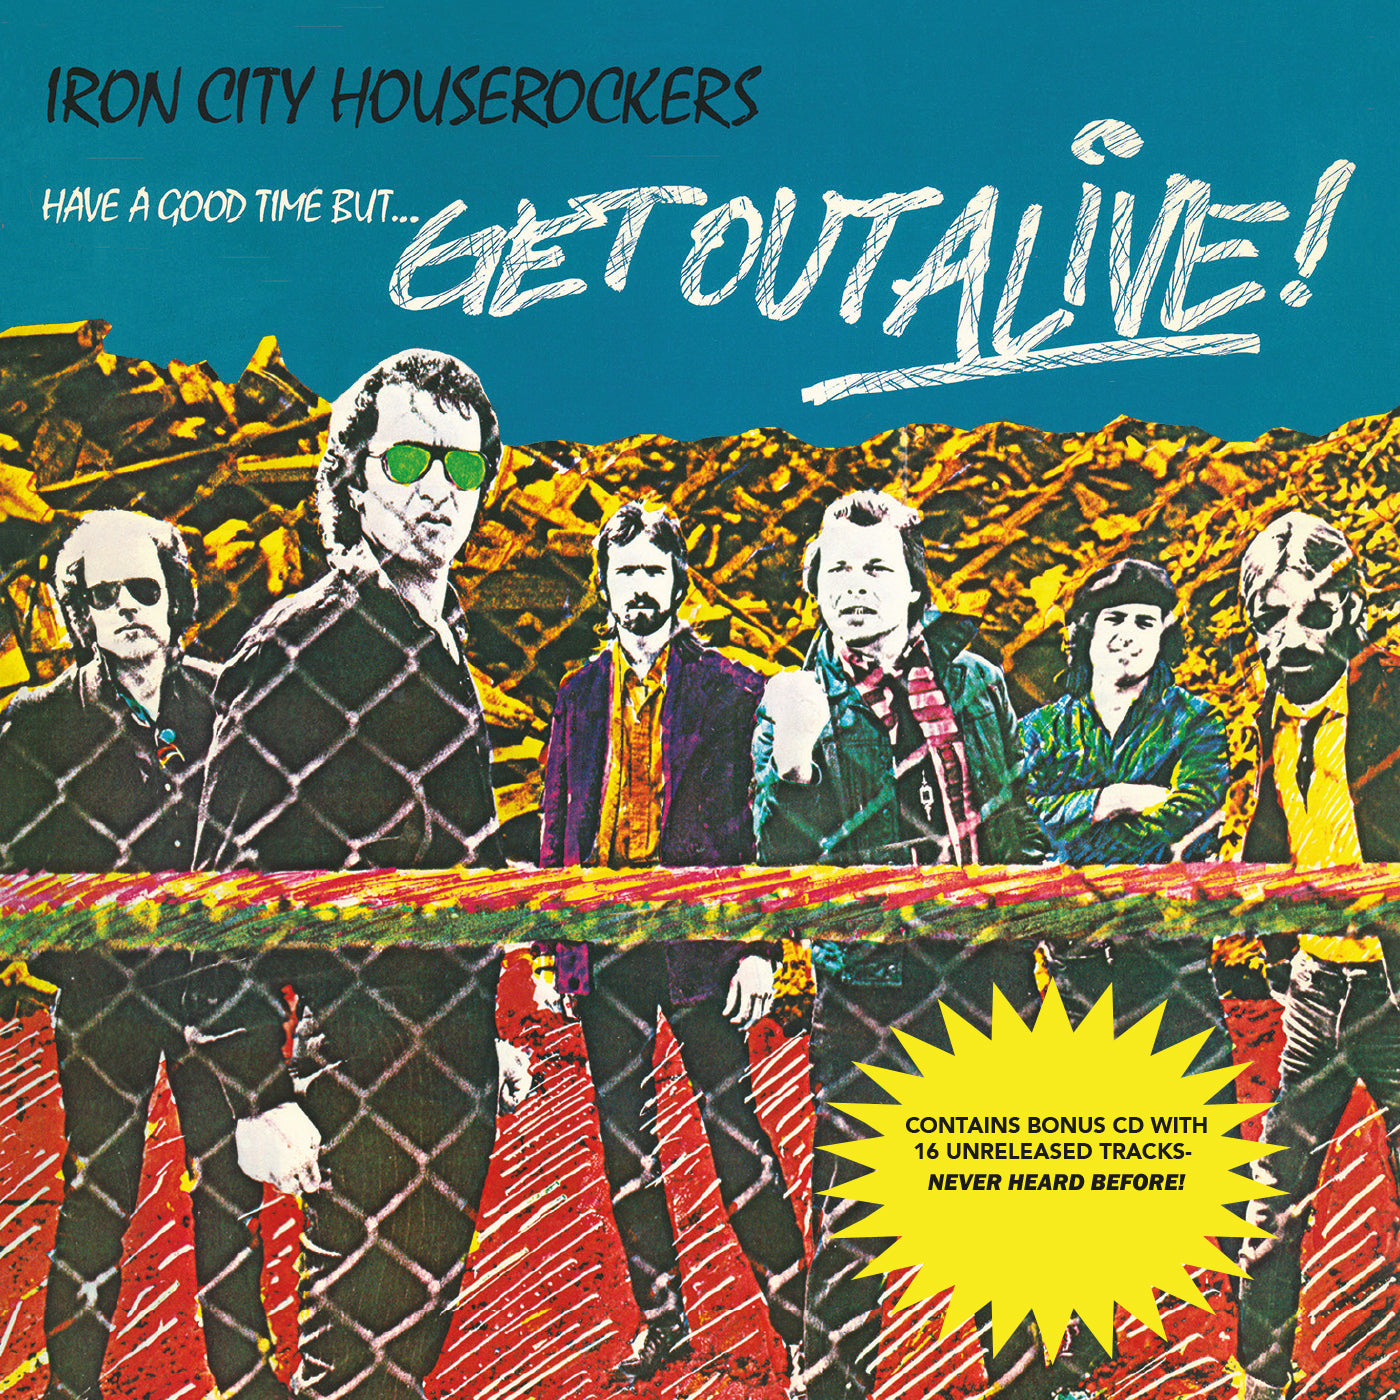 Iron City Houserockers: Have A Good Time... But Get Out Alive